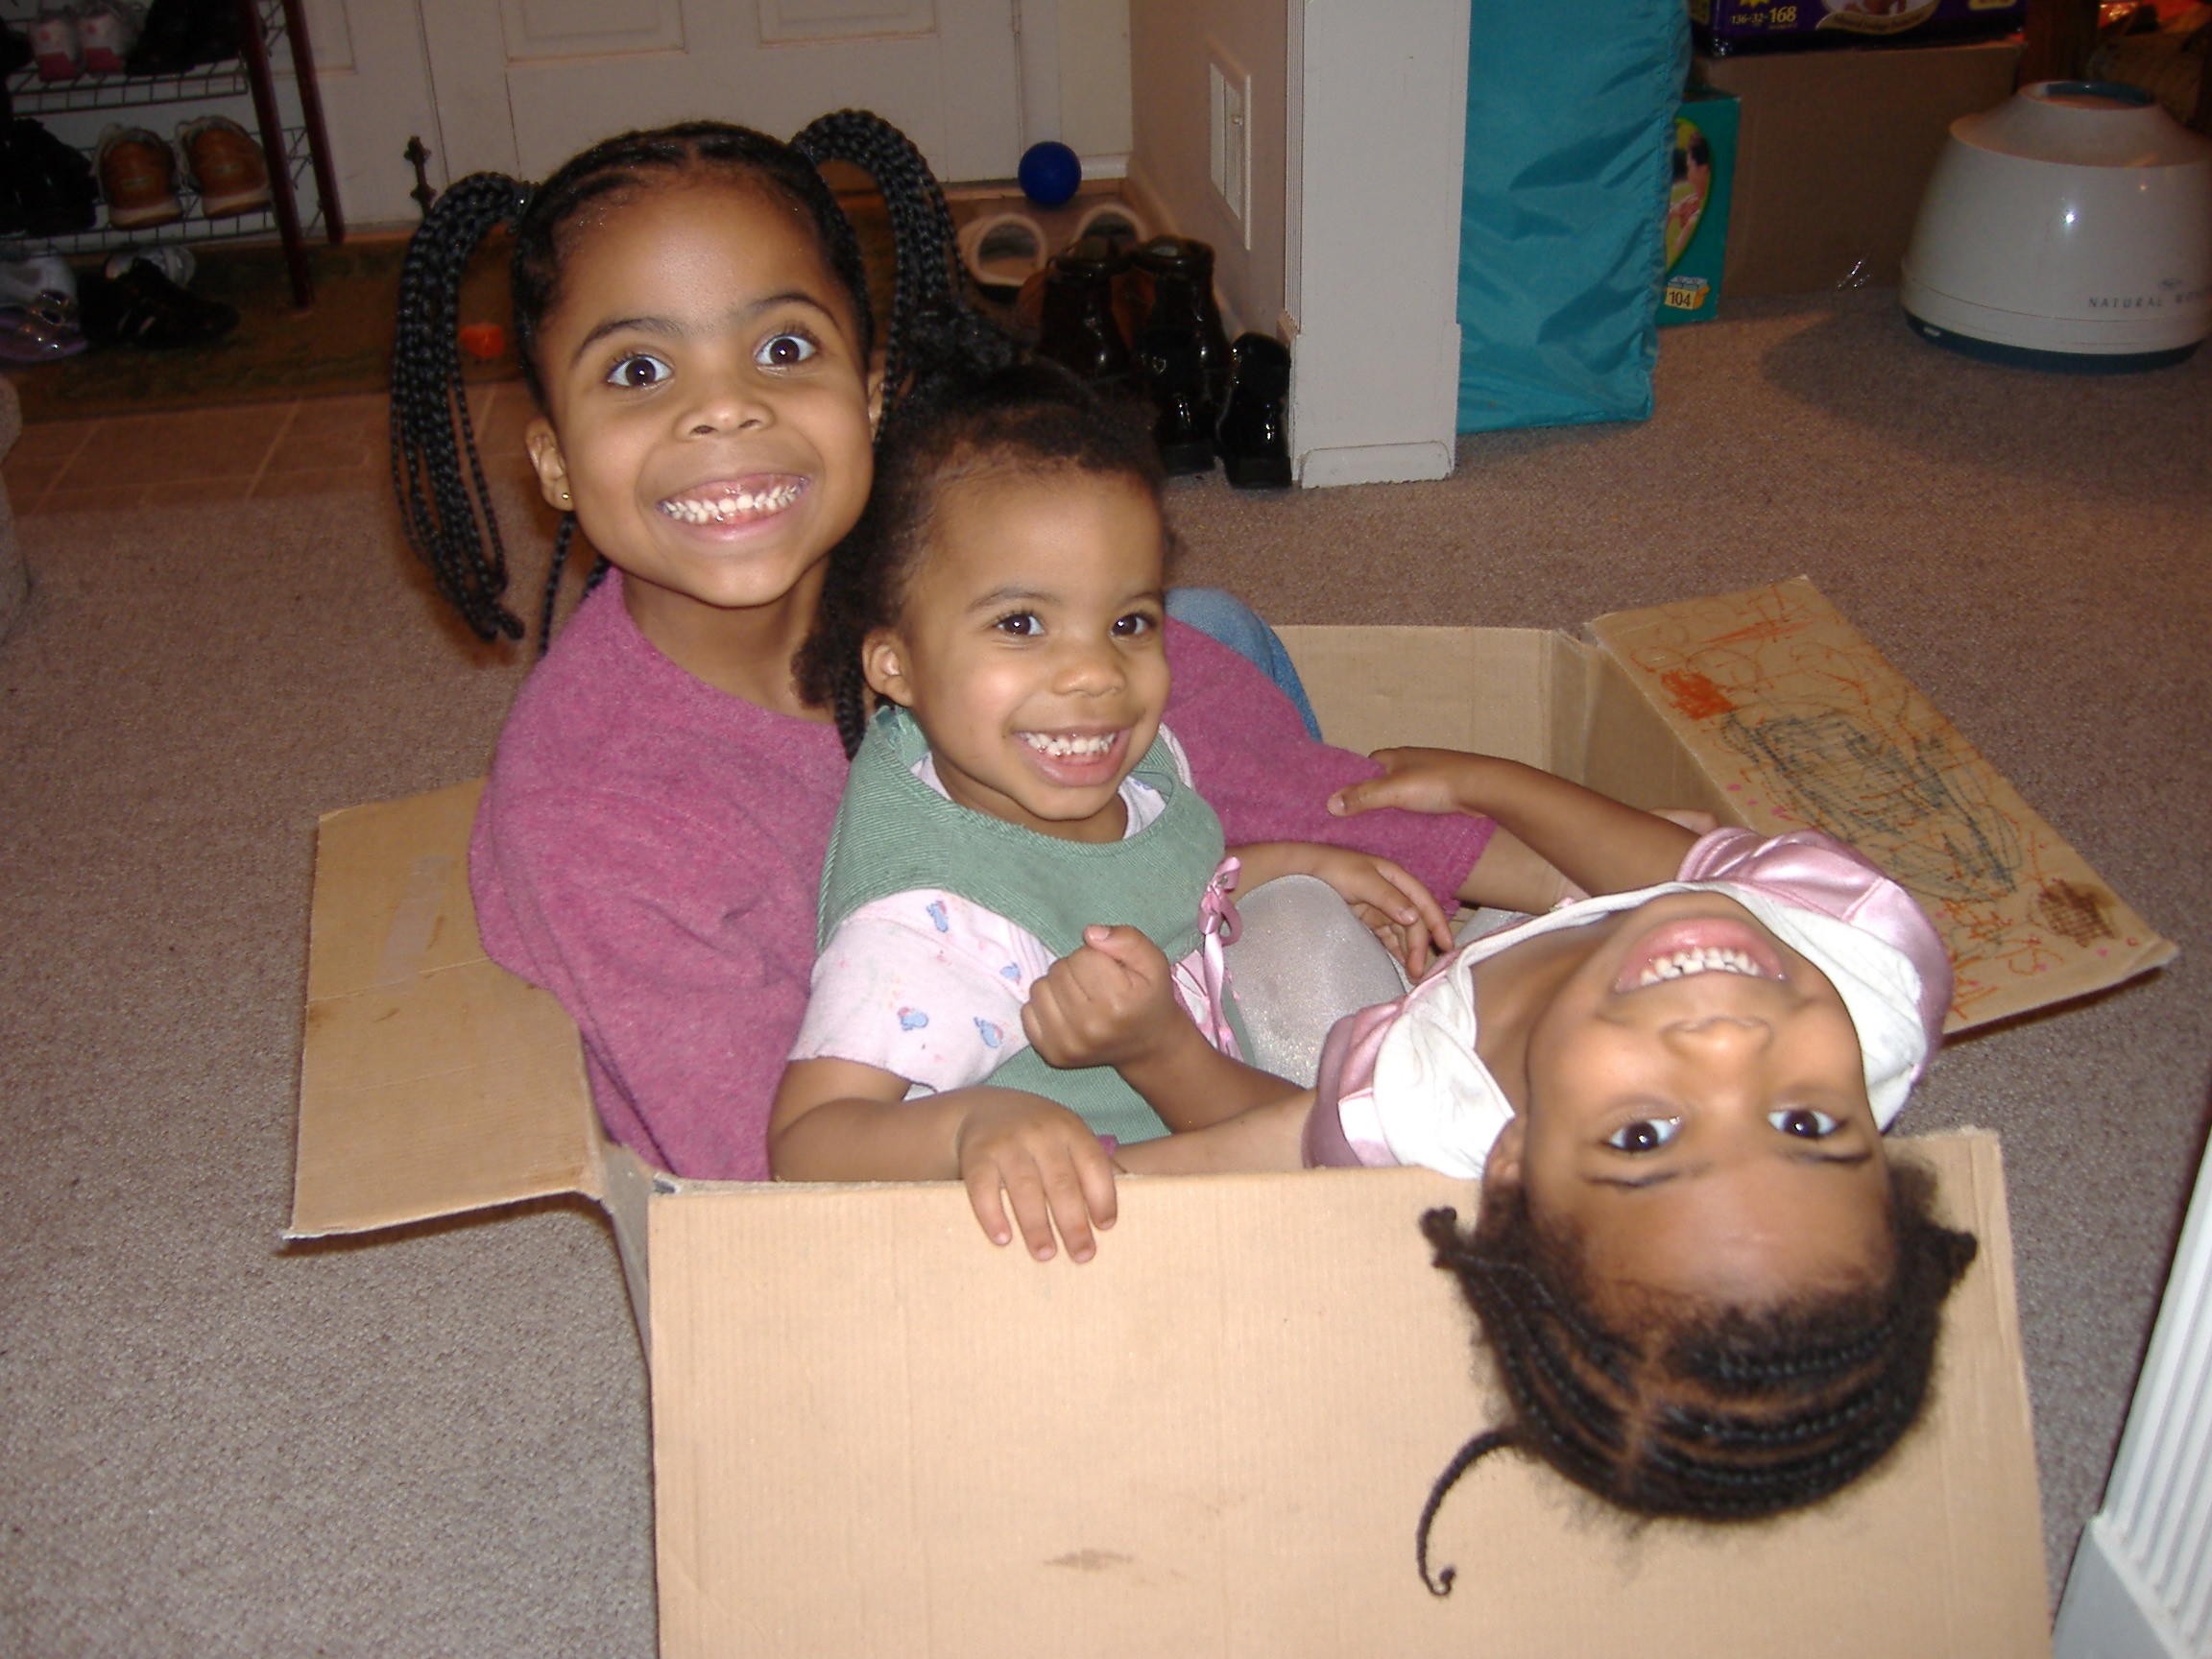 Nicole's three children sit in a box together and smile at the camera.